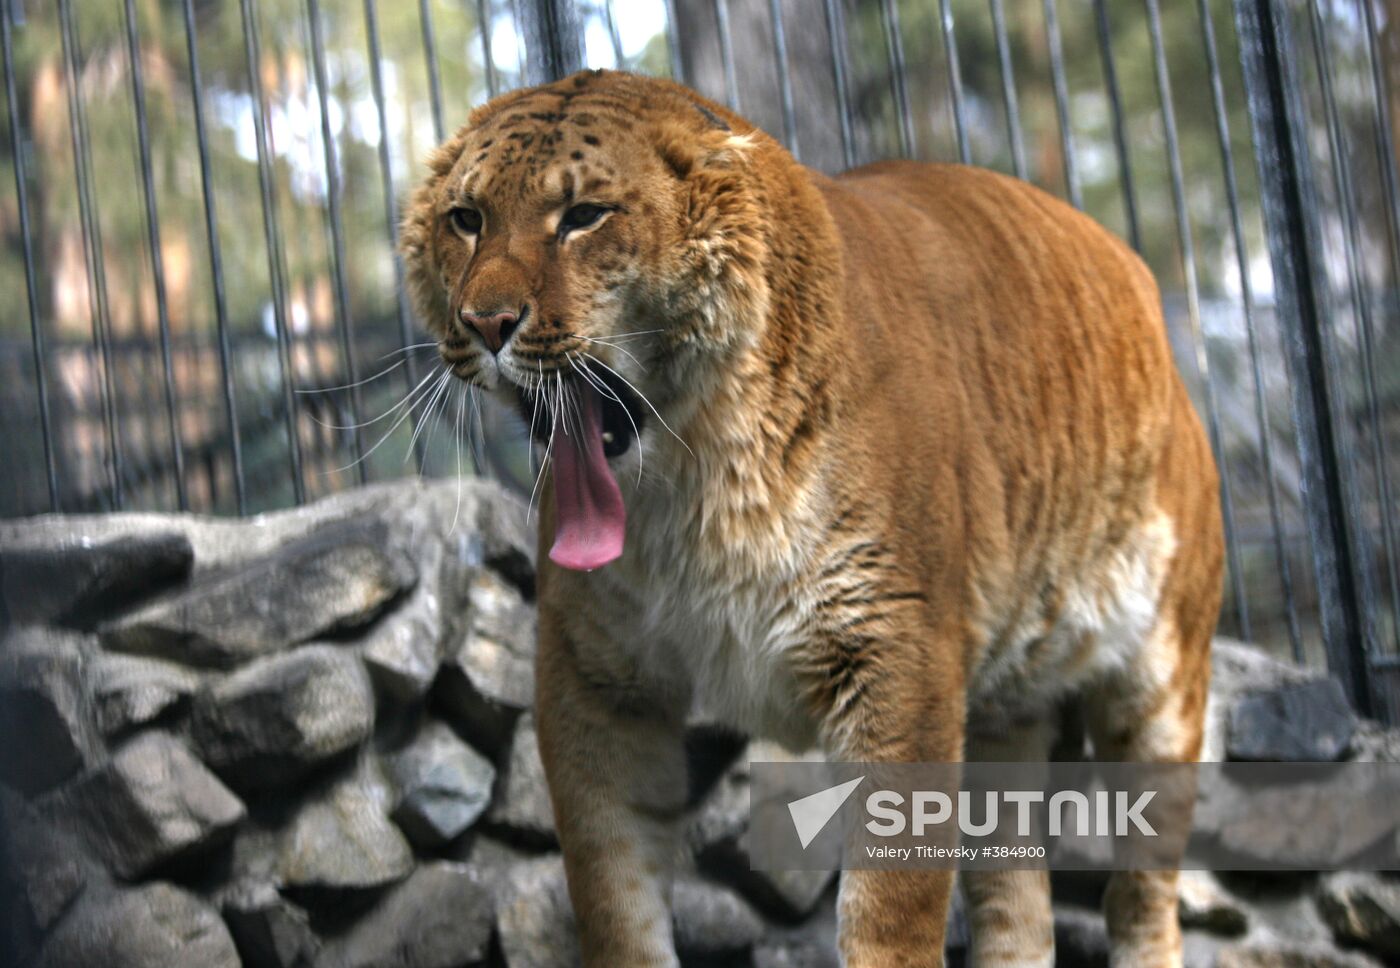 Novosibirsk Zoo animals moved to open-air cages